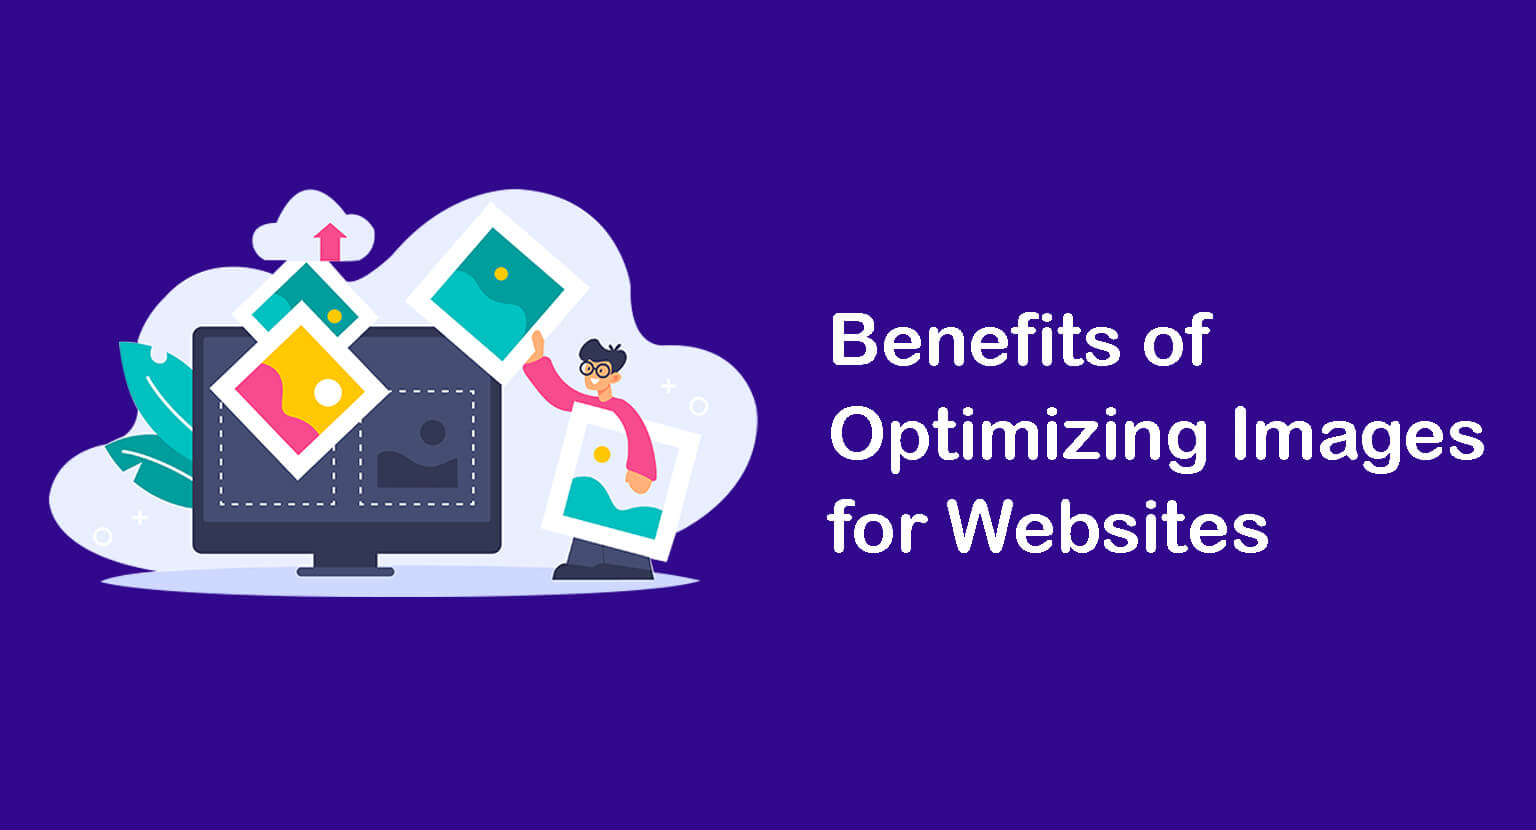 Benefits of optimizing images for website performance